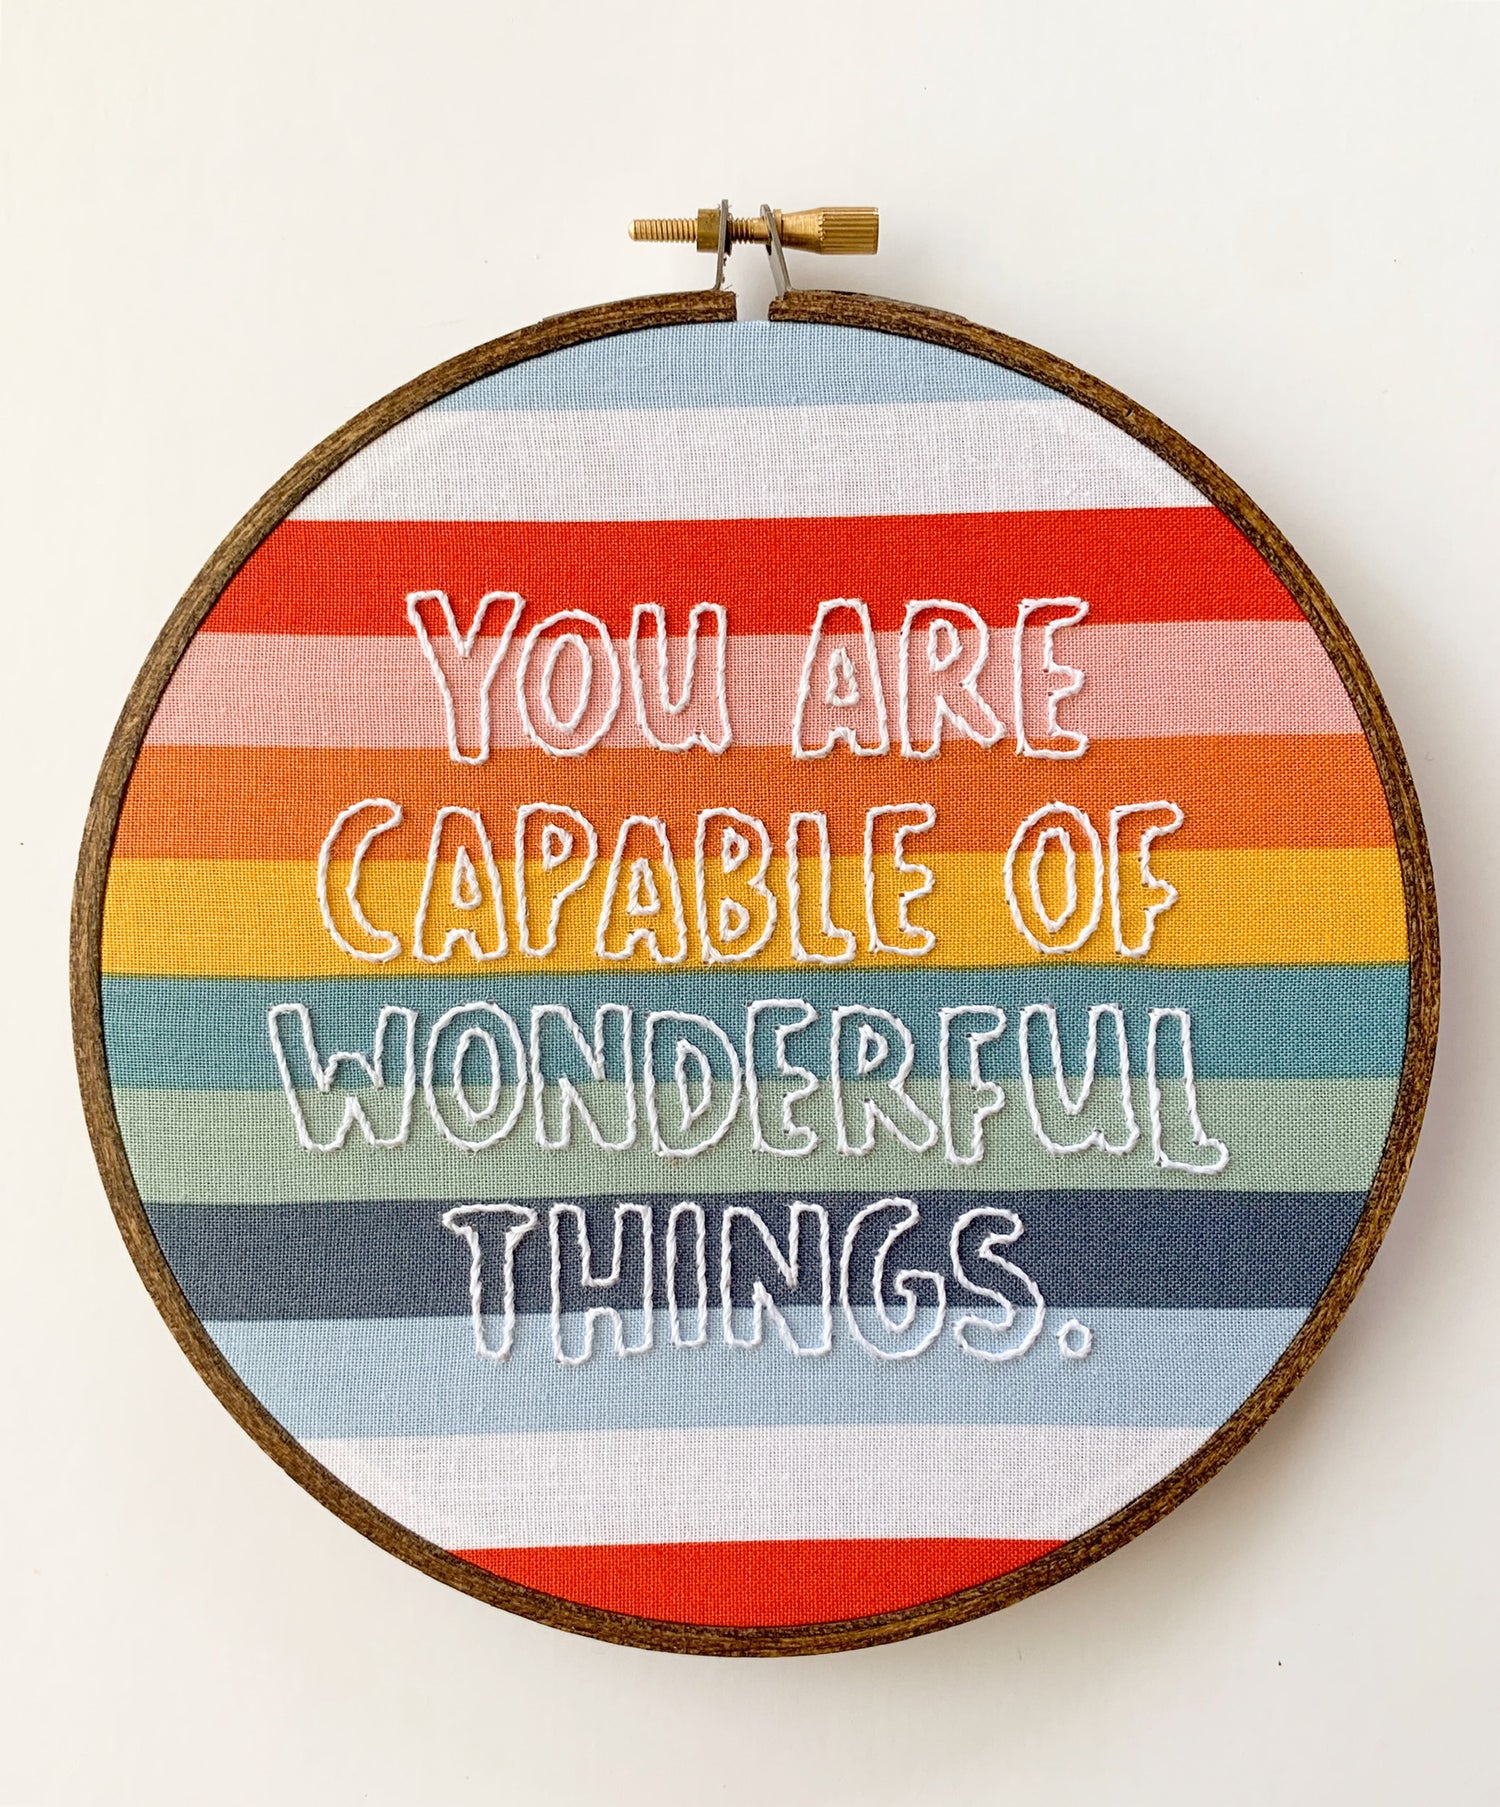 You are capable of wonderful things